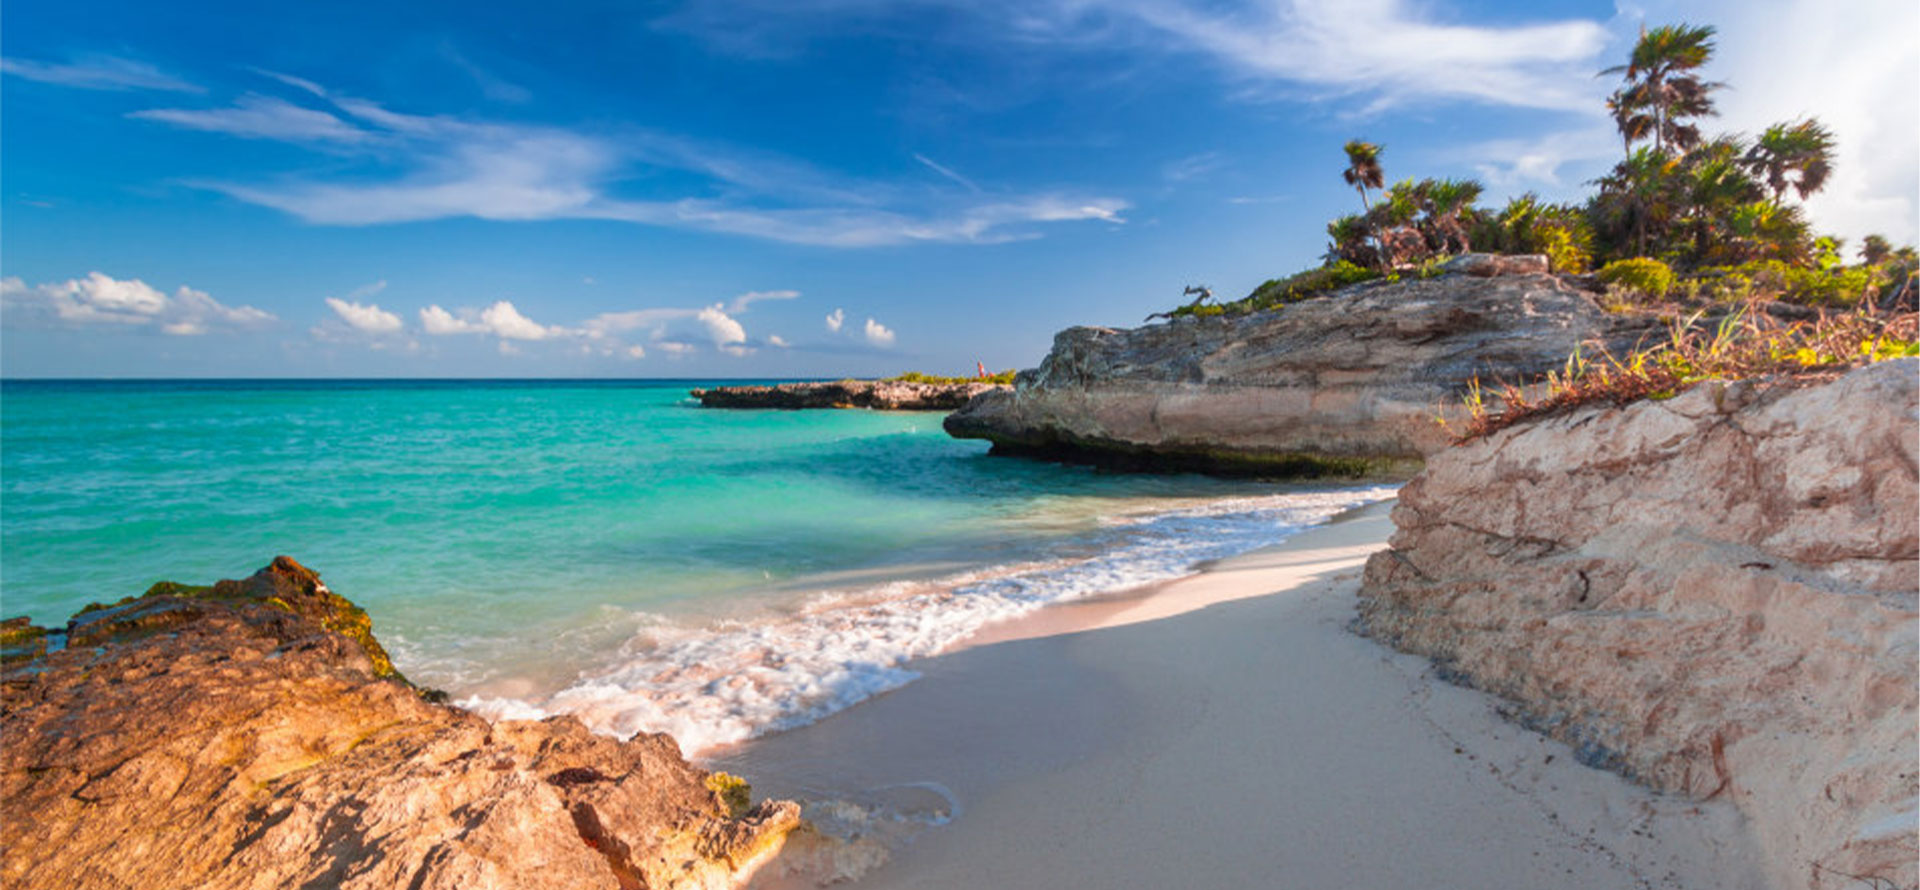 Cancun and playa del carmen, beach in one of these destinations.